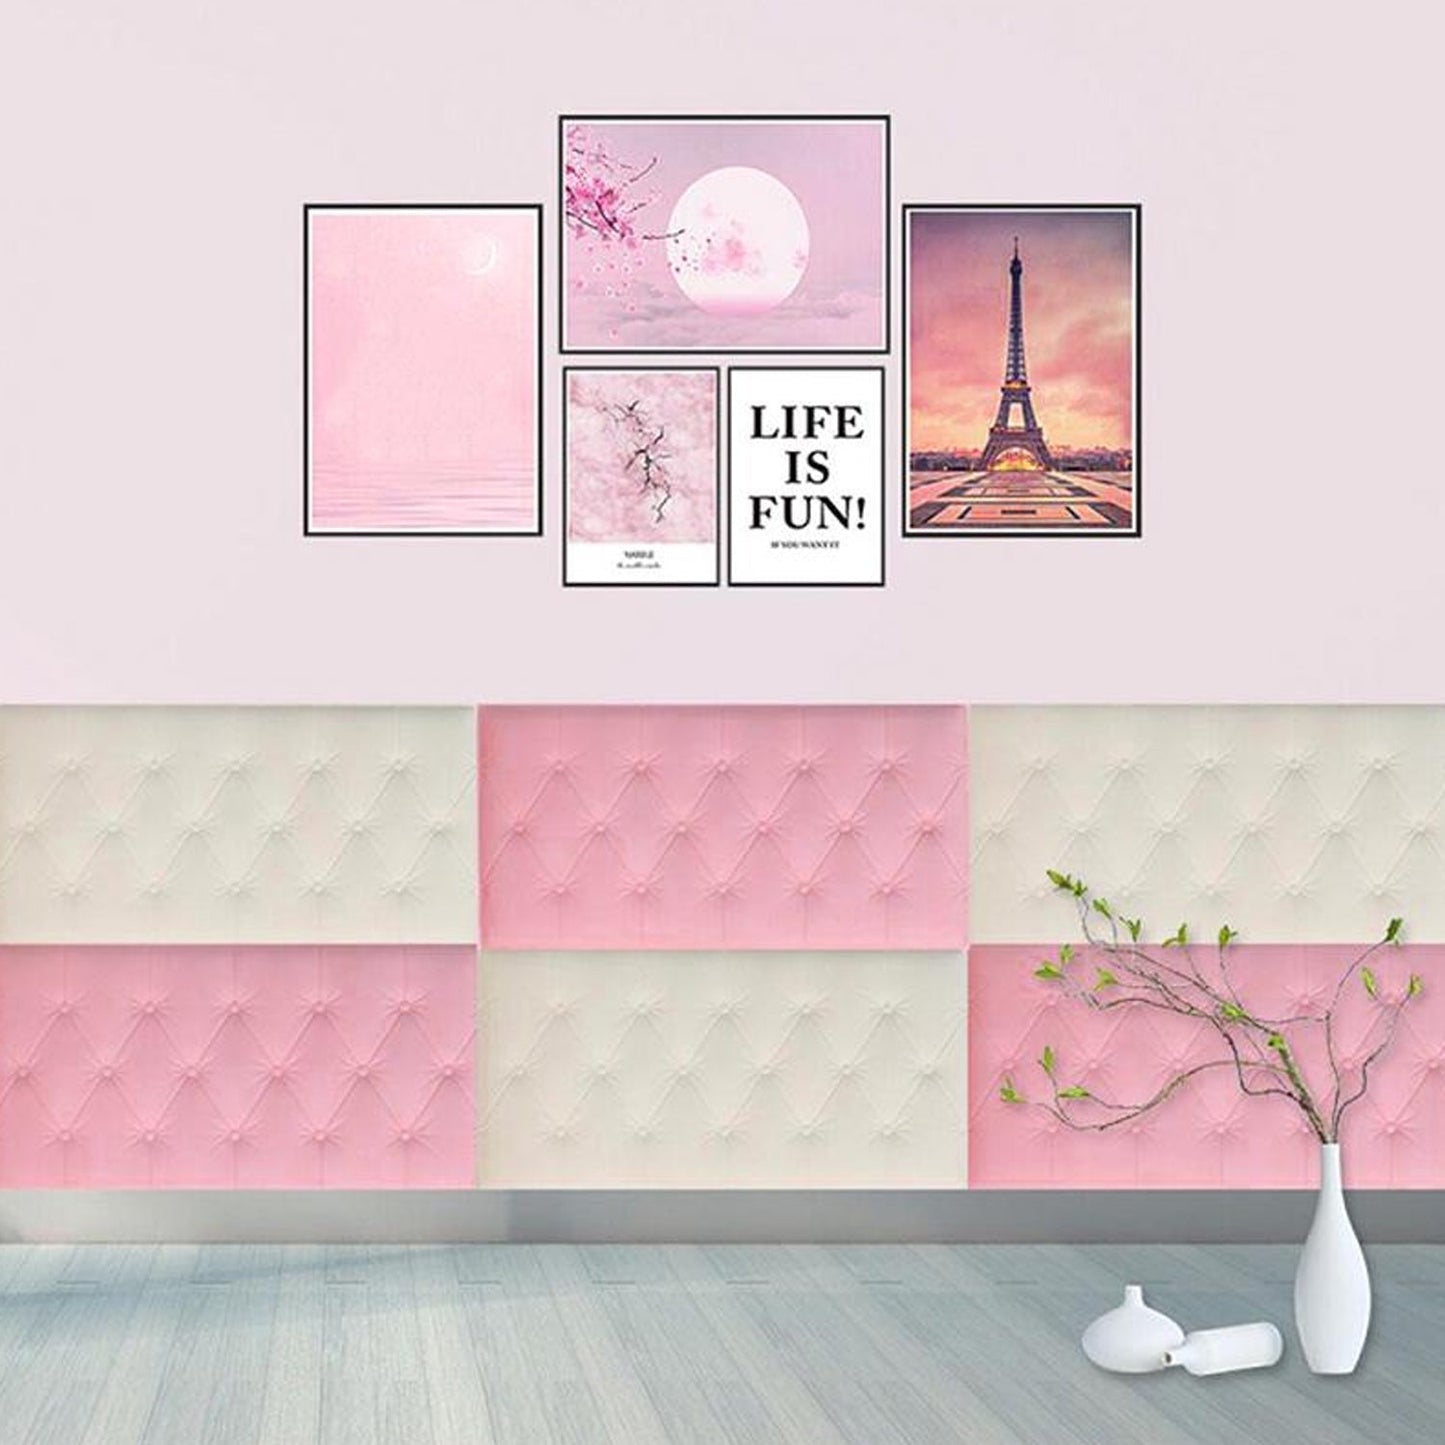 9039 Pink 3D Adhesive wallpaper for living Room. Room Wall Paper Home Decor Self Adhesive Wallpaper